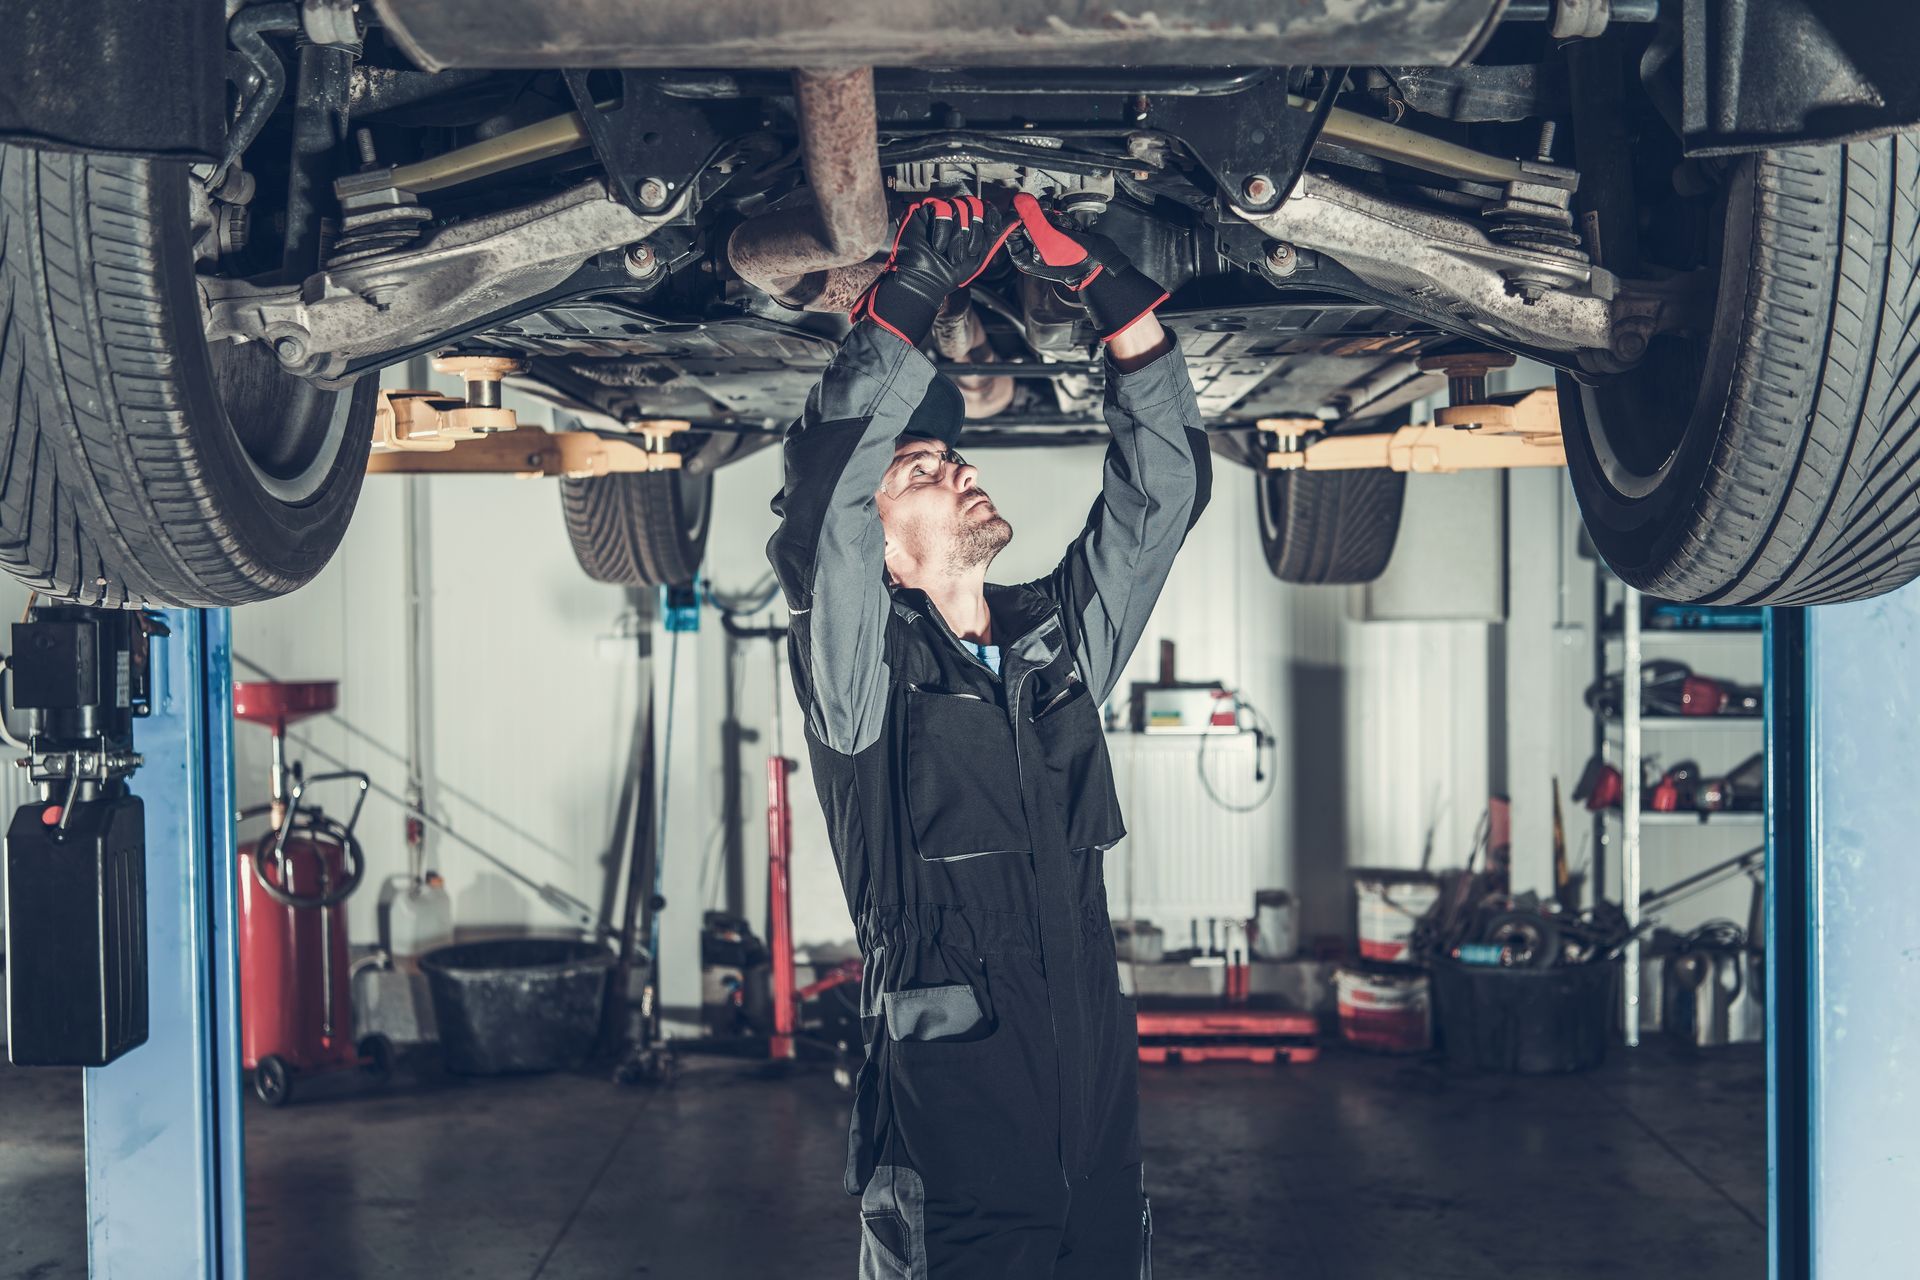 Mechanic working on a car on a lift